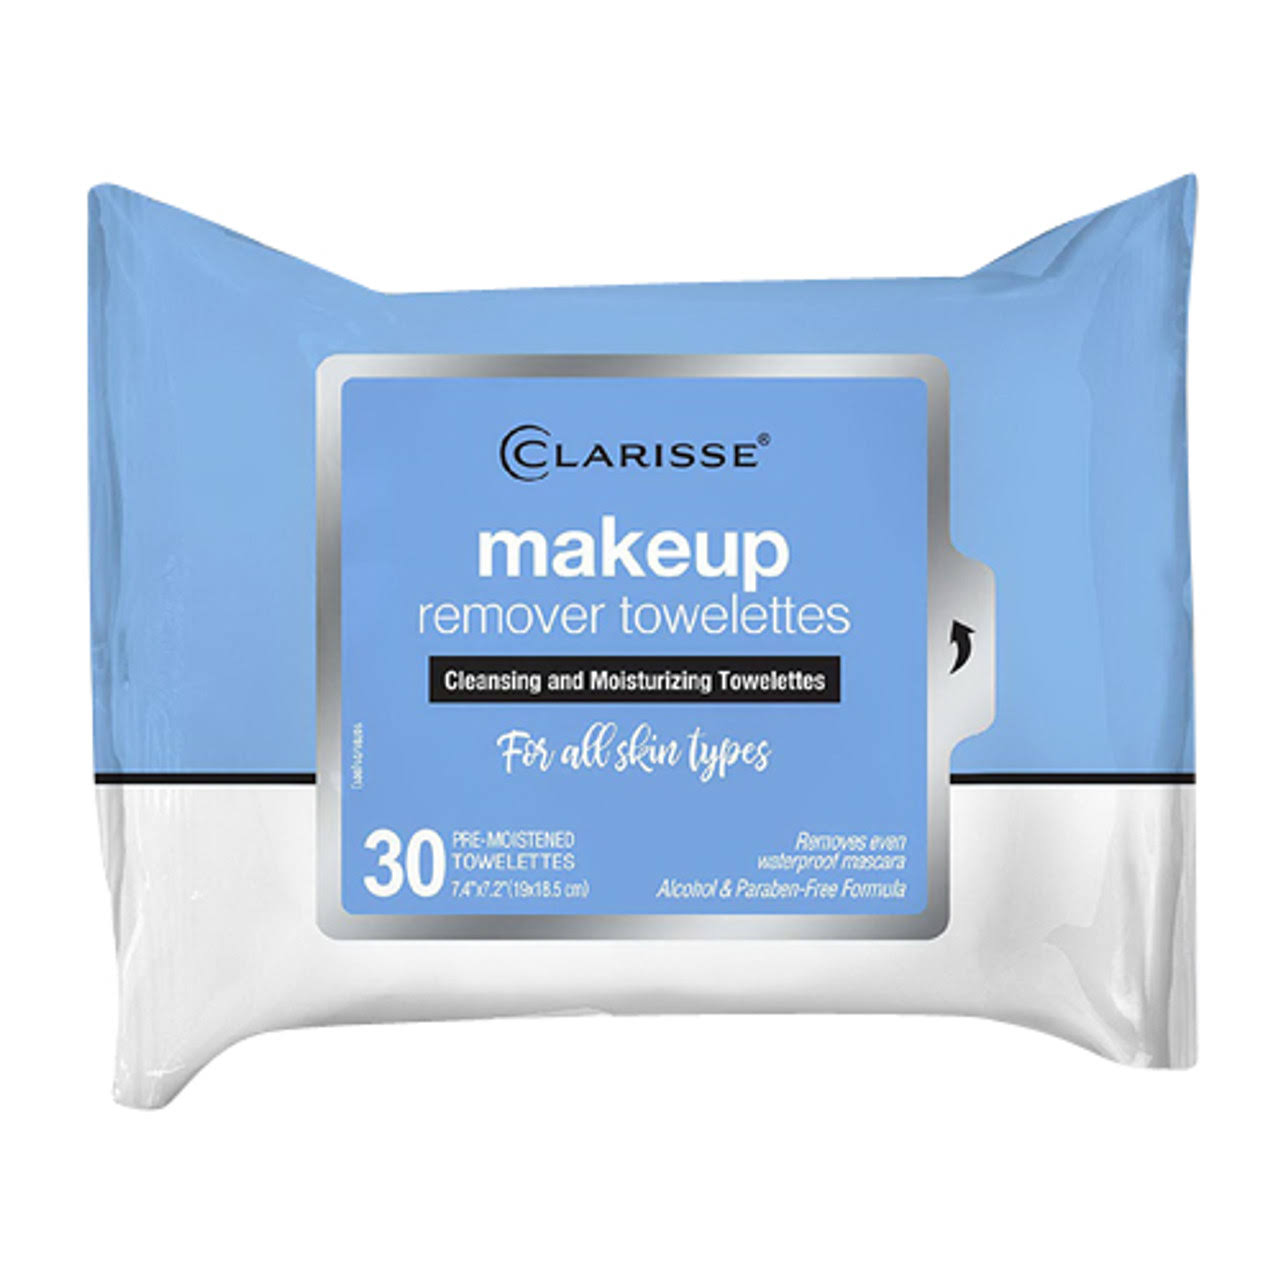 Clarisse Make-Up Remover Towelettes - 30ct